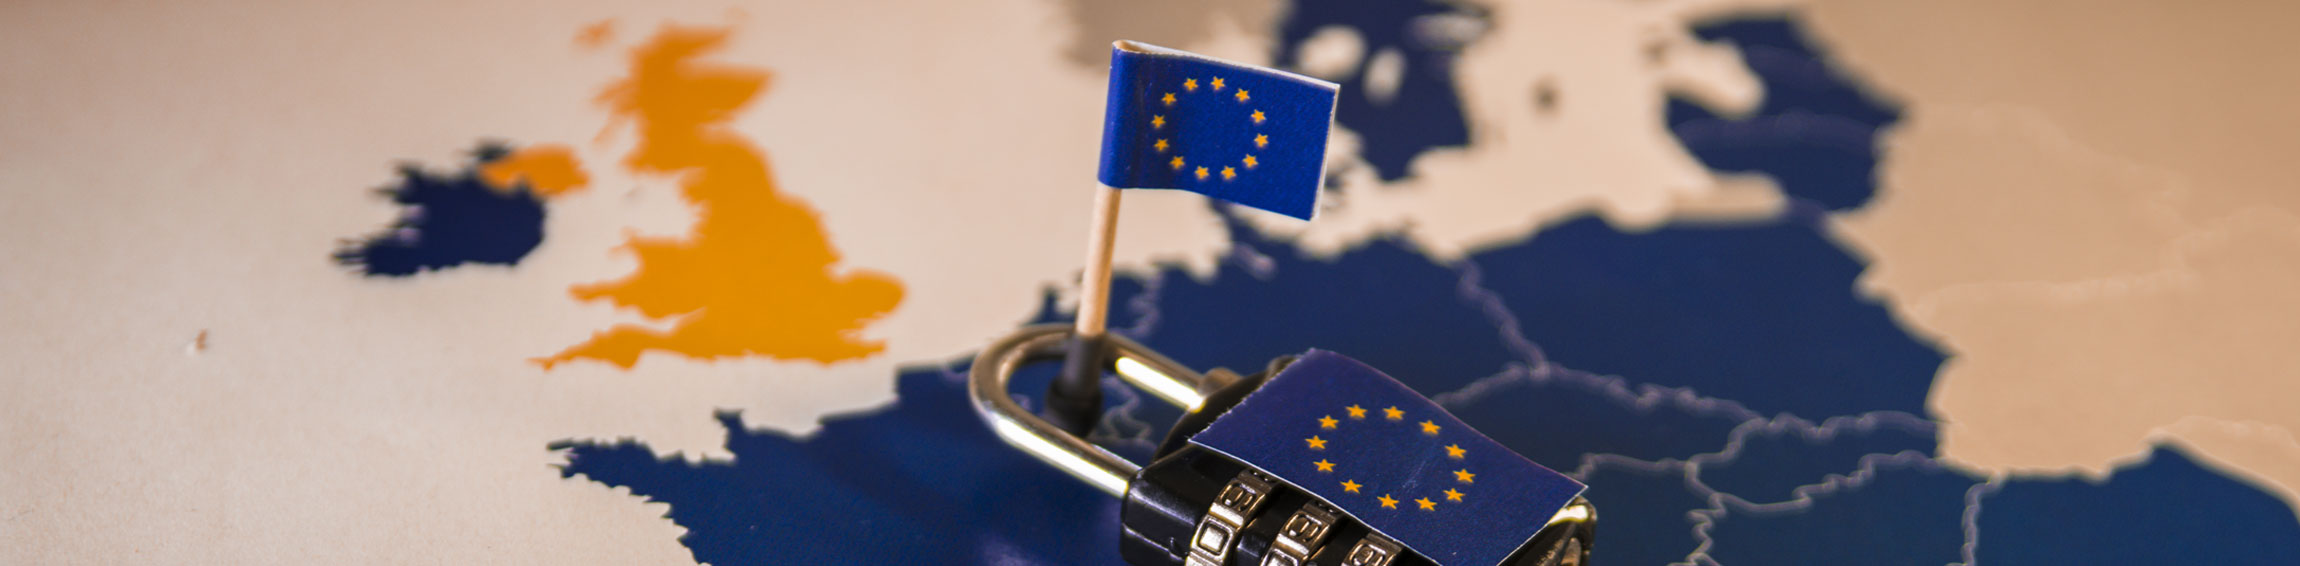 What can the EU’s new data security and privacy policy mean for call centers?